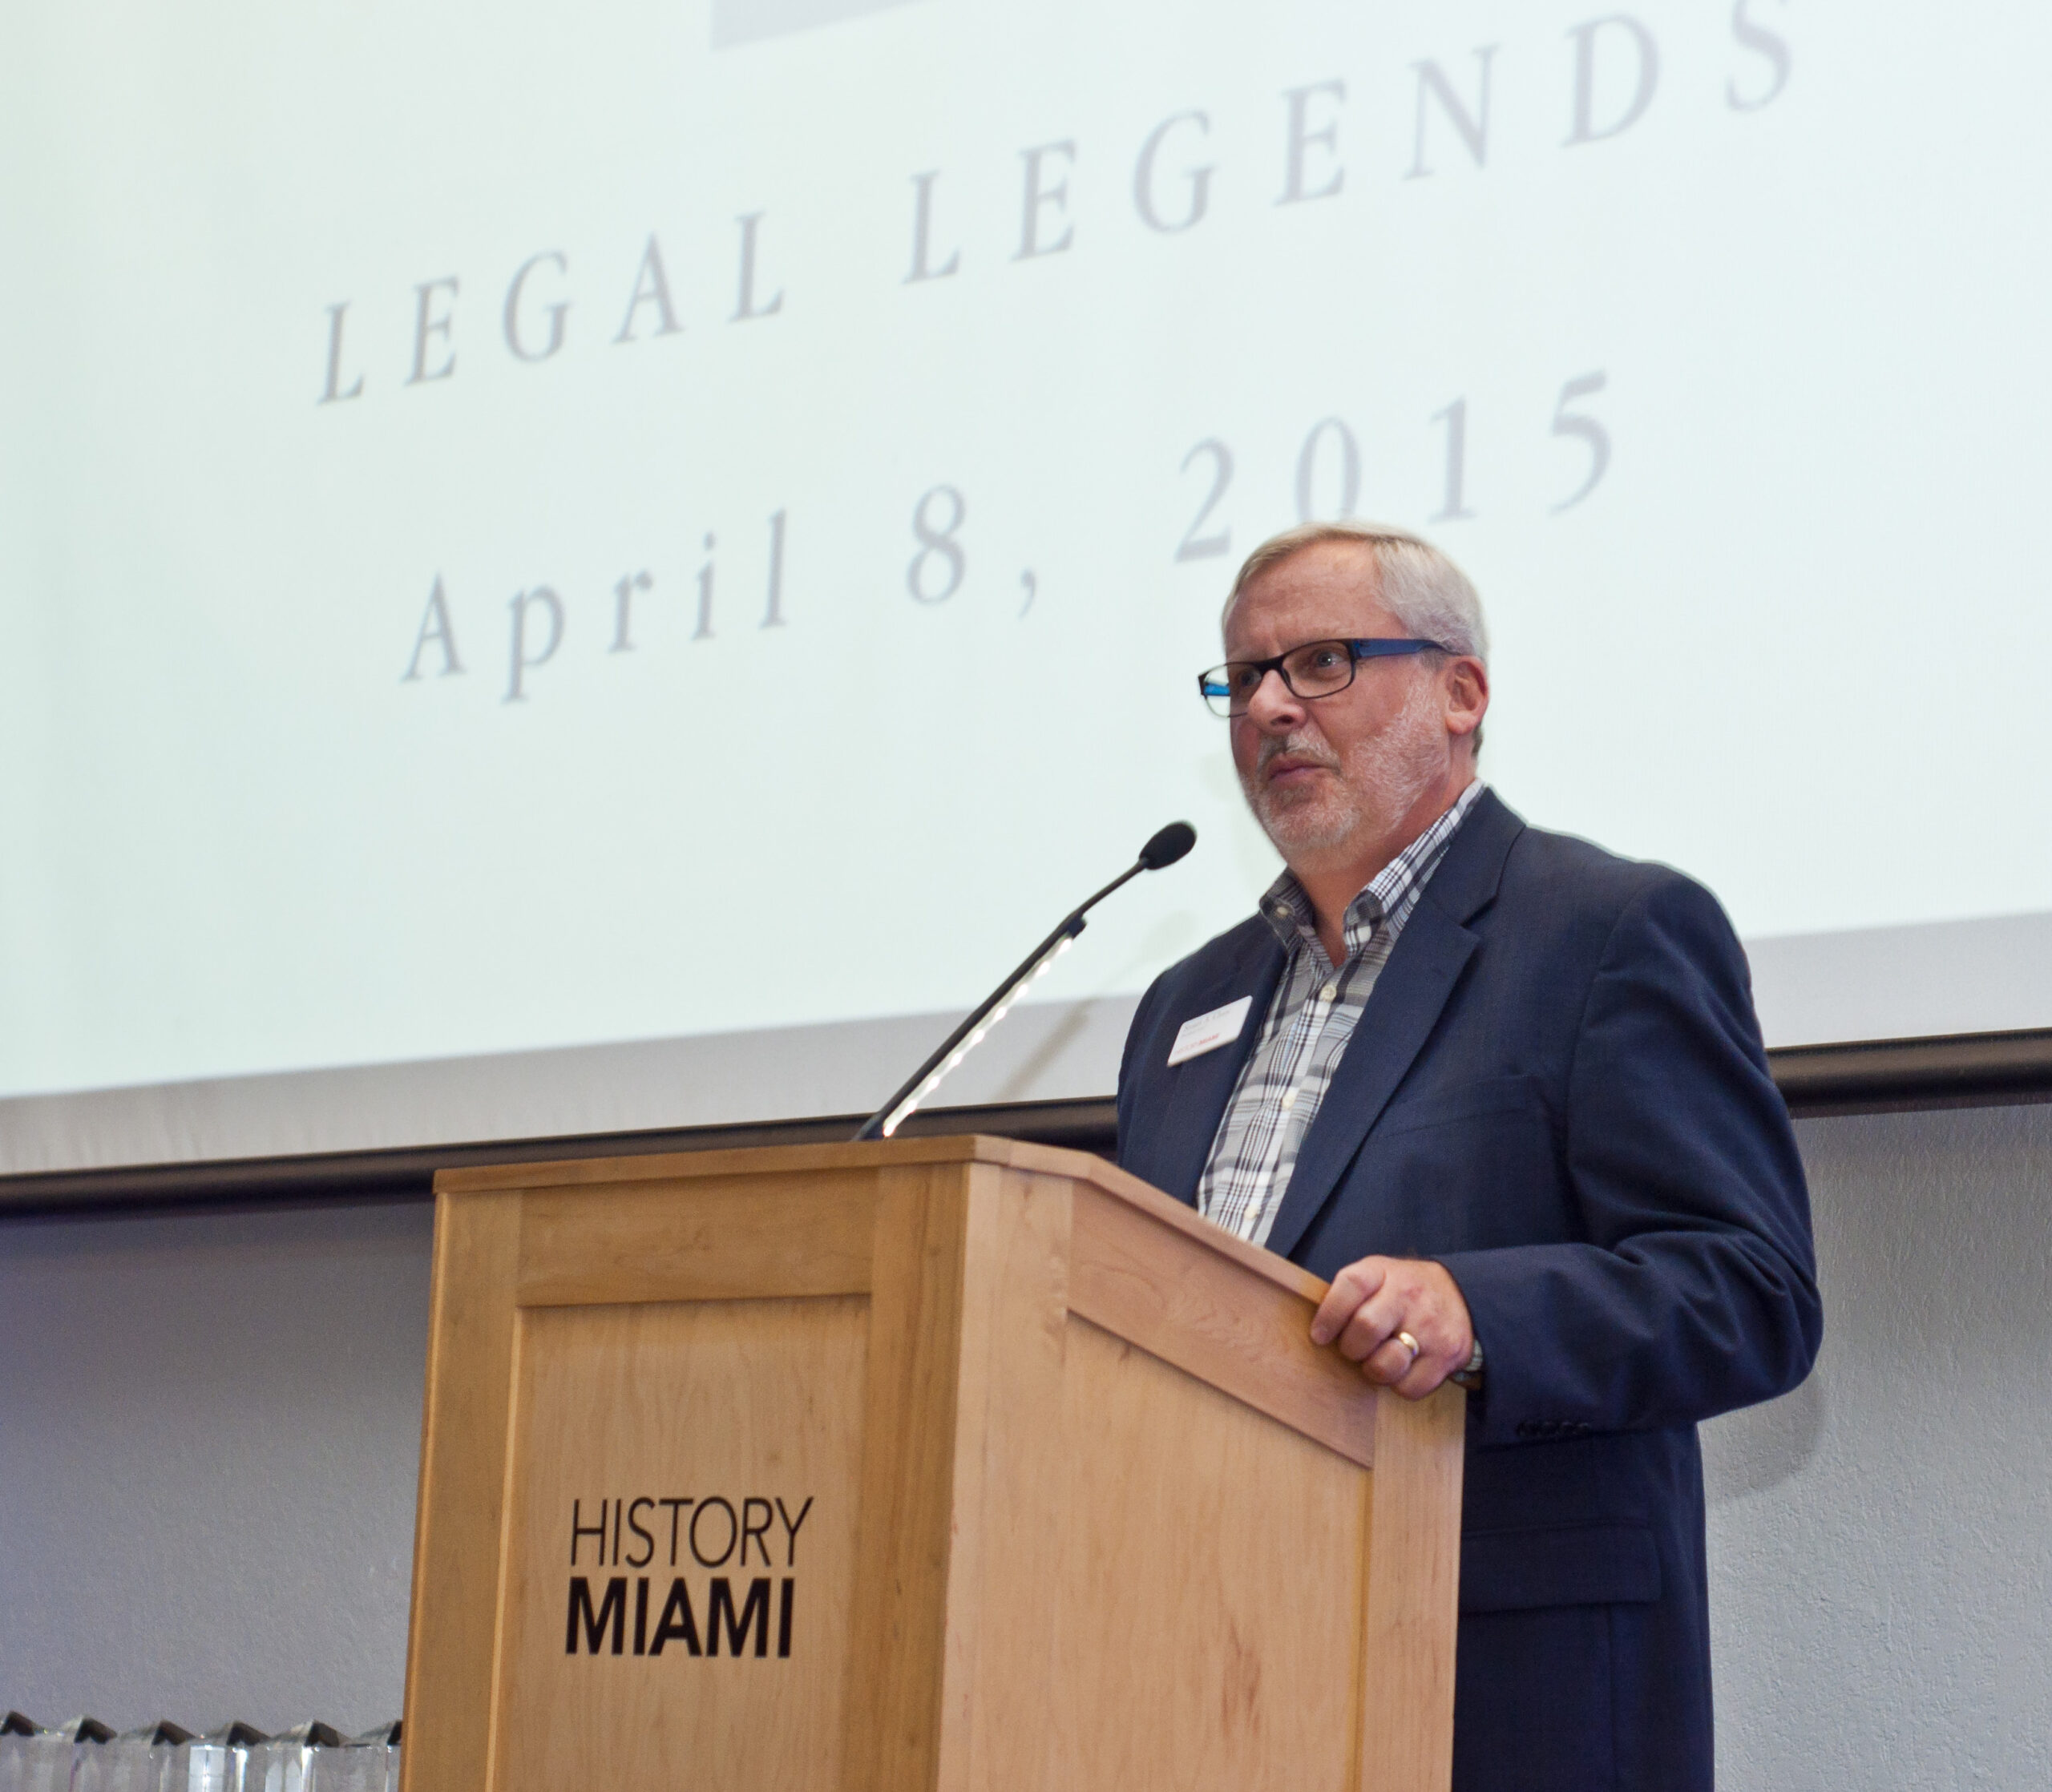 2016 Legal Legend Awards and Reception